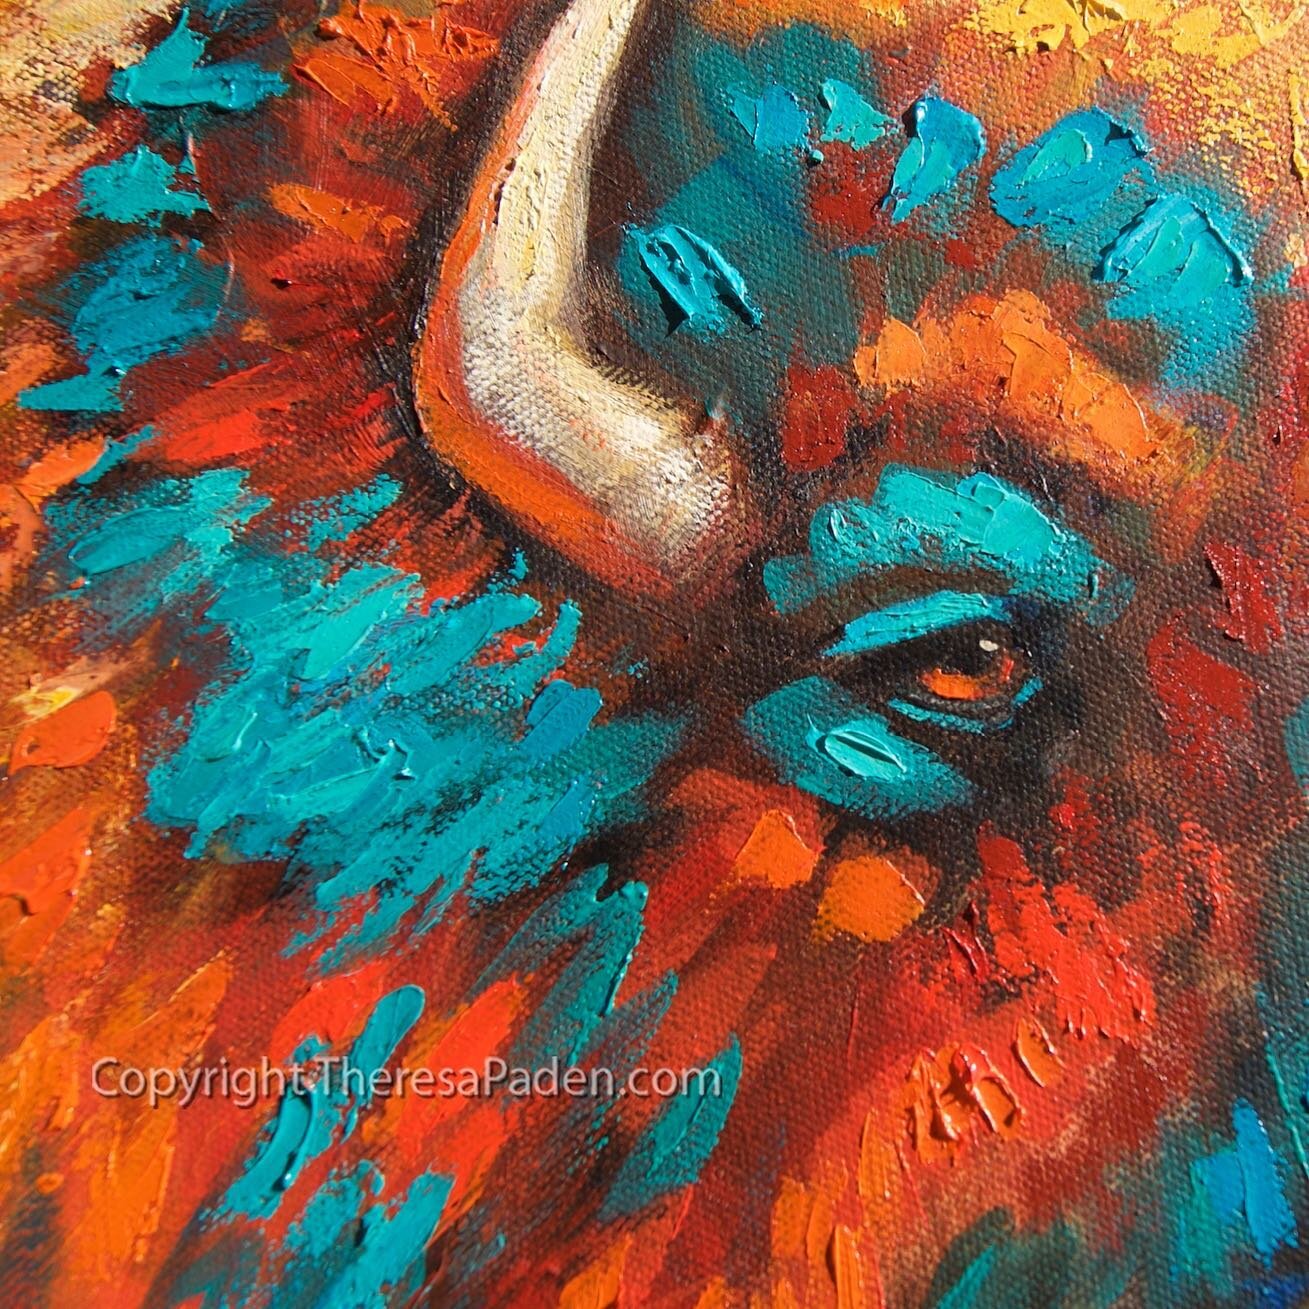 A closeup photo shows the thick oil paint and beautiful southwest colors in &ldquo;Head Honcho&rdquo;